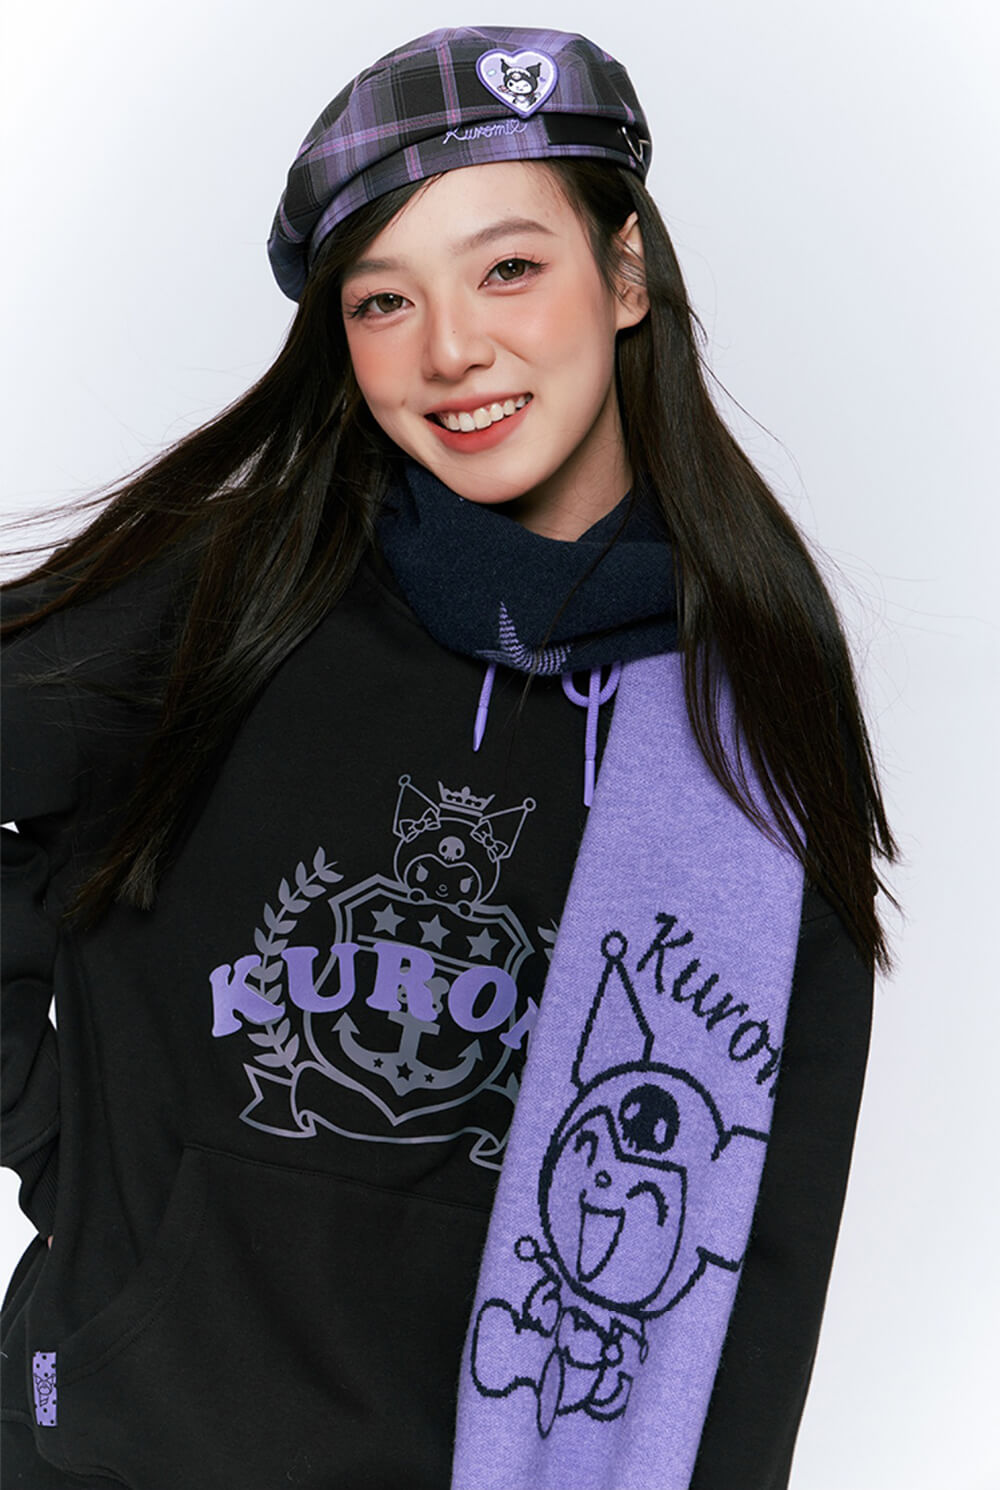 sanrio-authorized-kuromi-preppy-look-graphic-black-hoodie-matched-with-kuromi-scarf